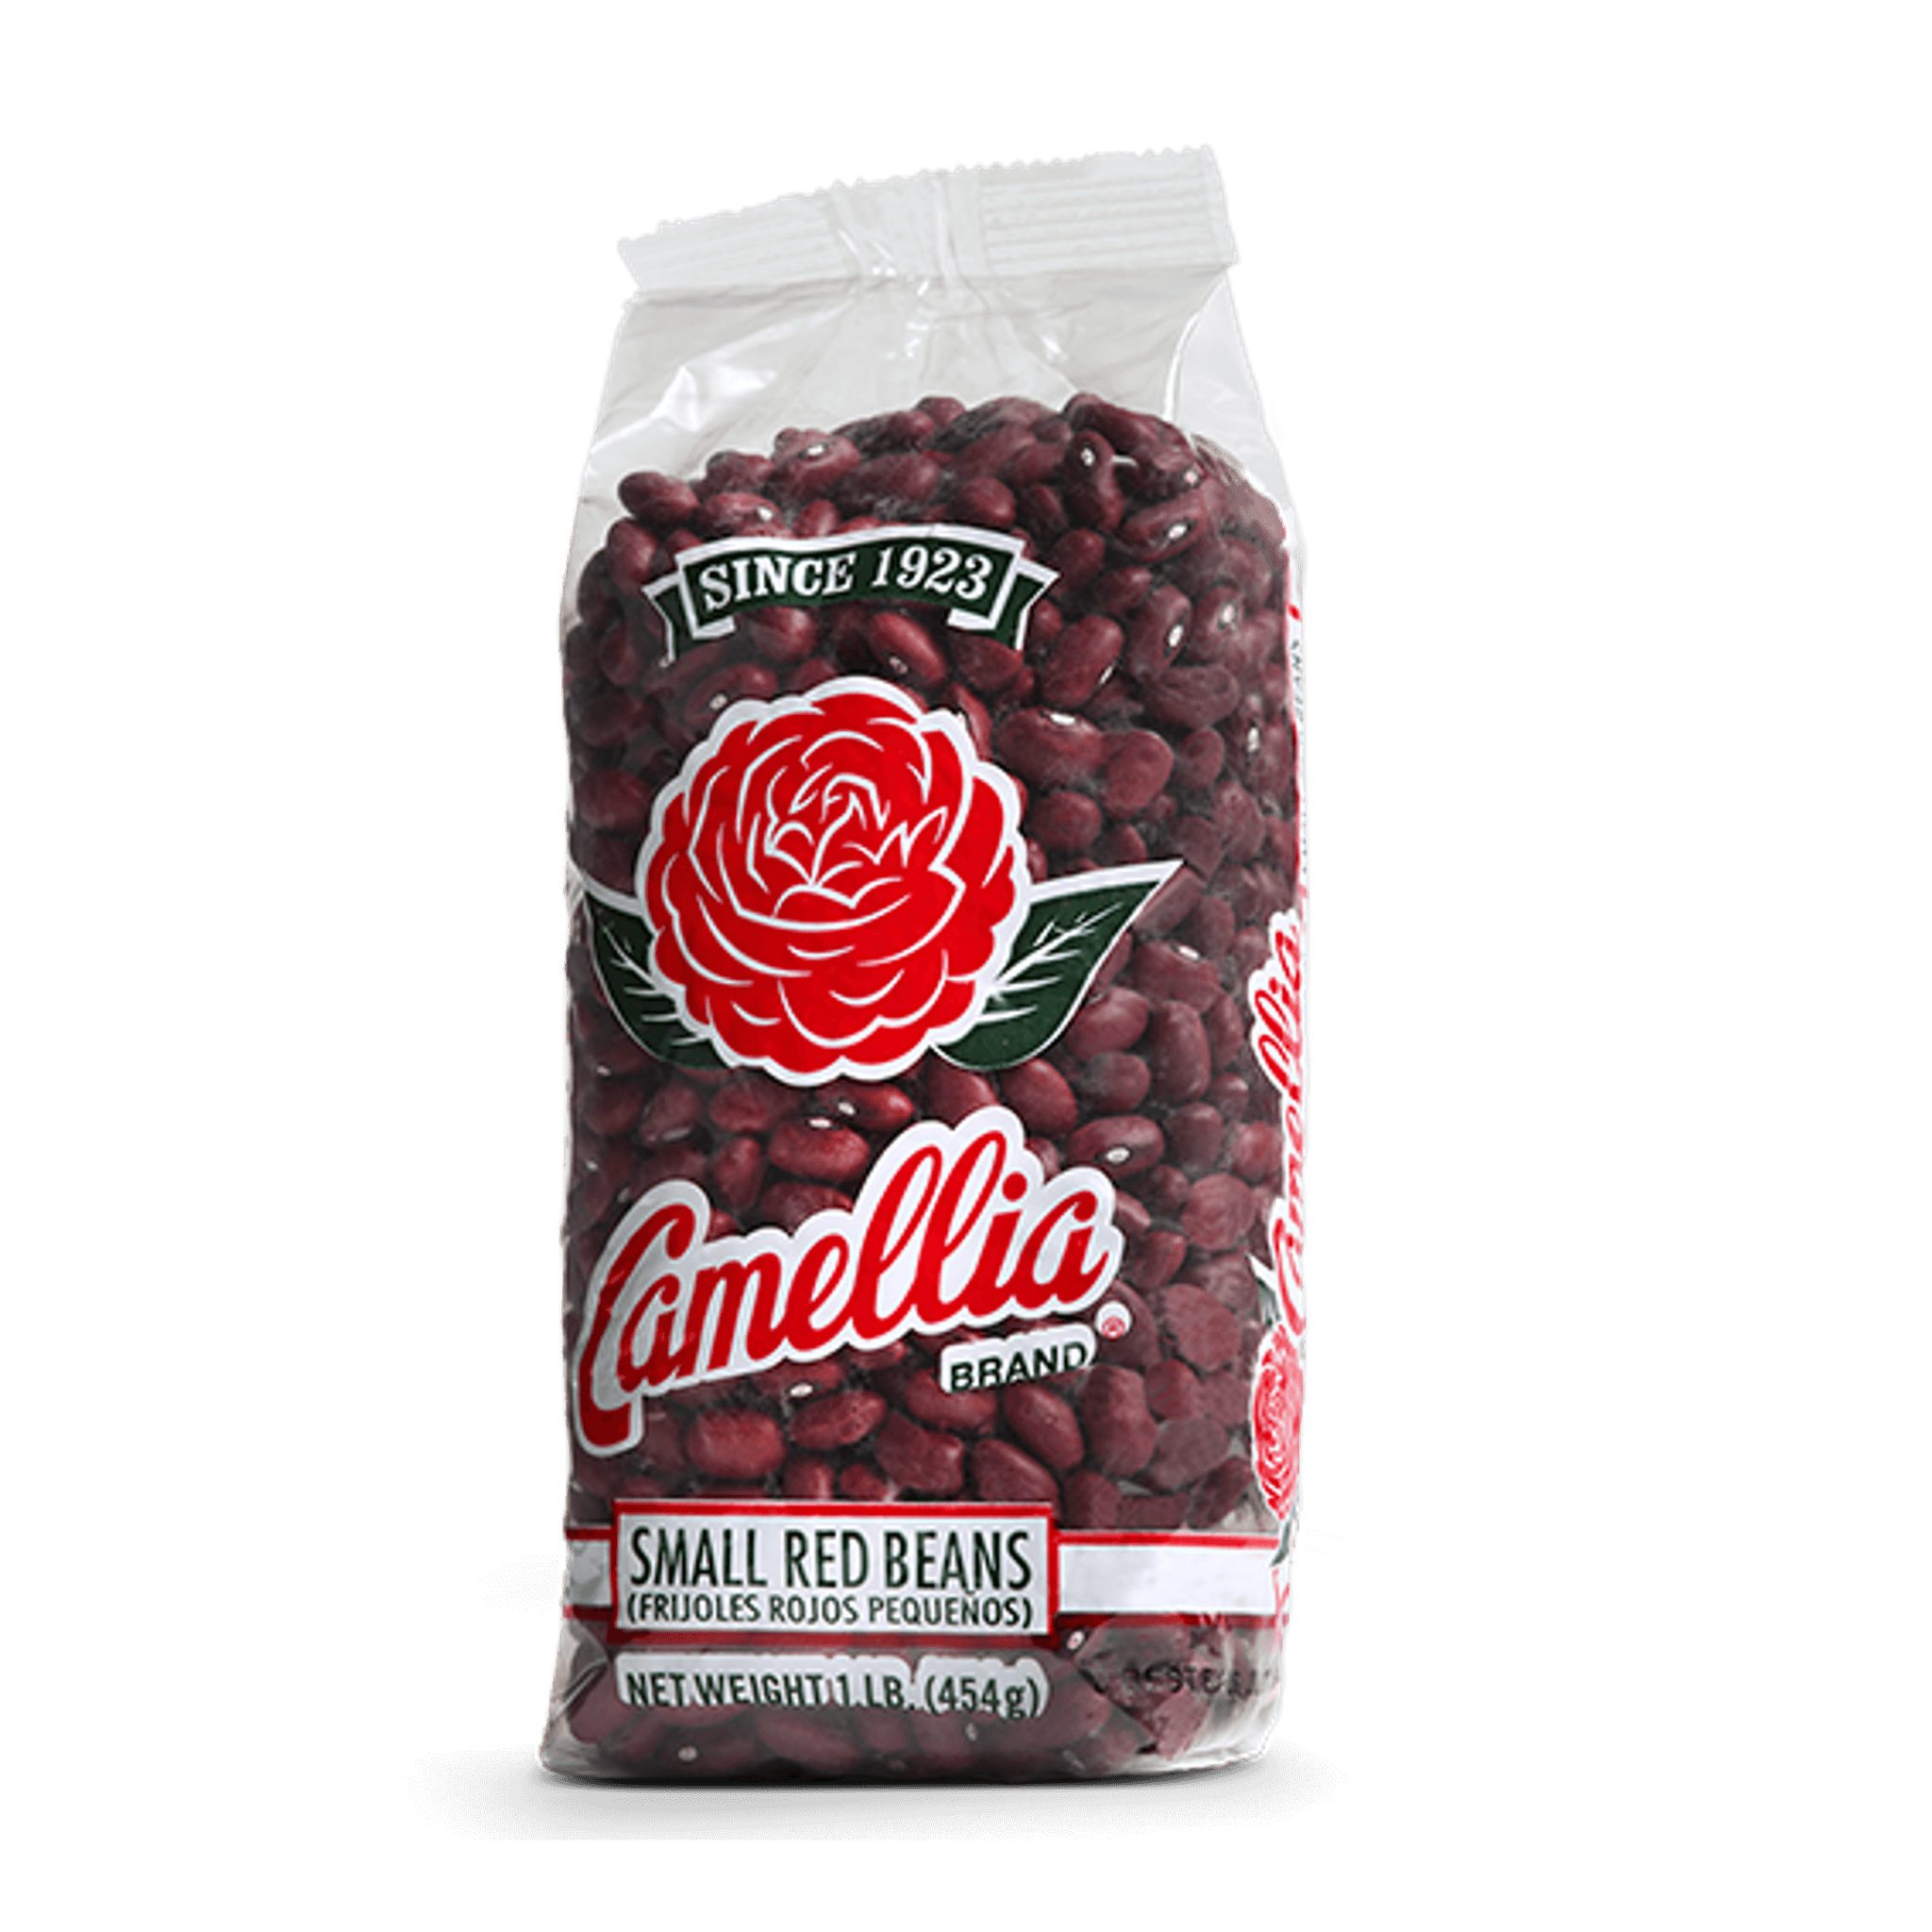 Small Red Beans :: Camellia Brand – Camellia Brand Beans